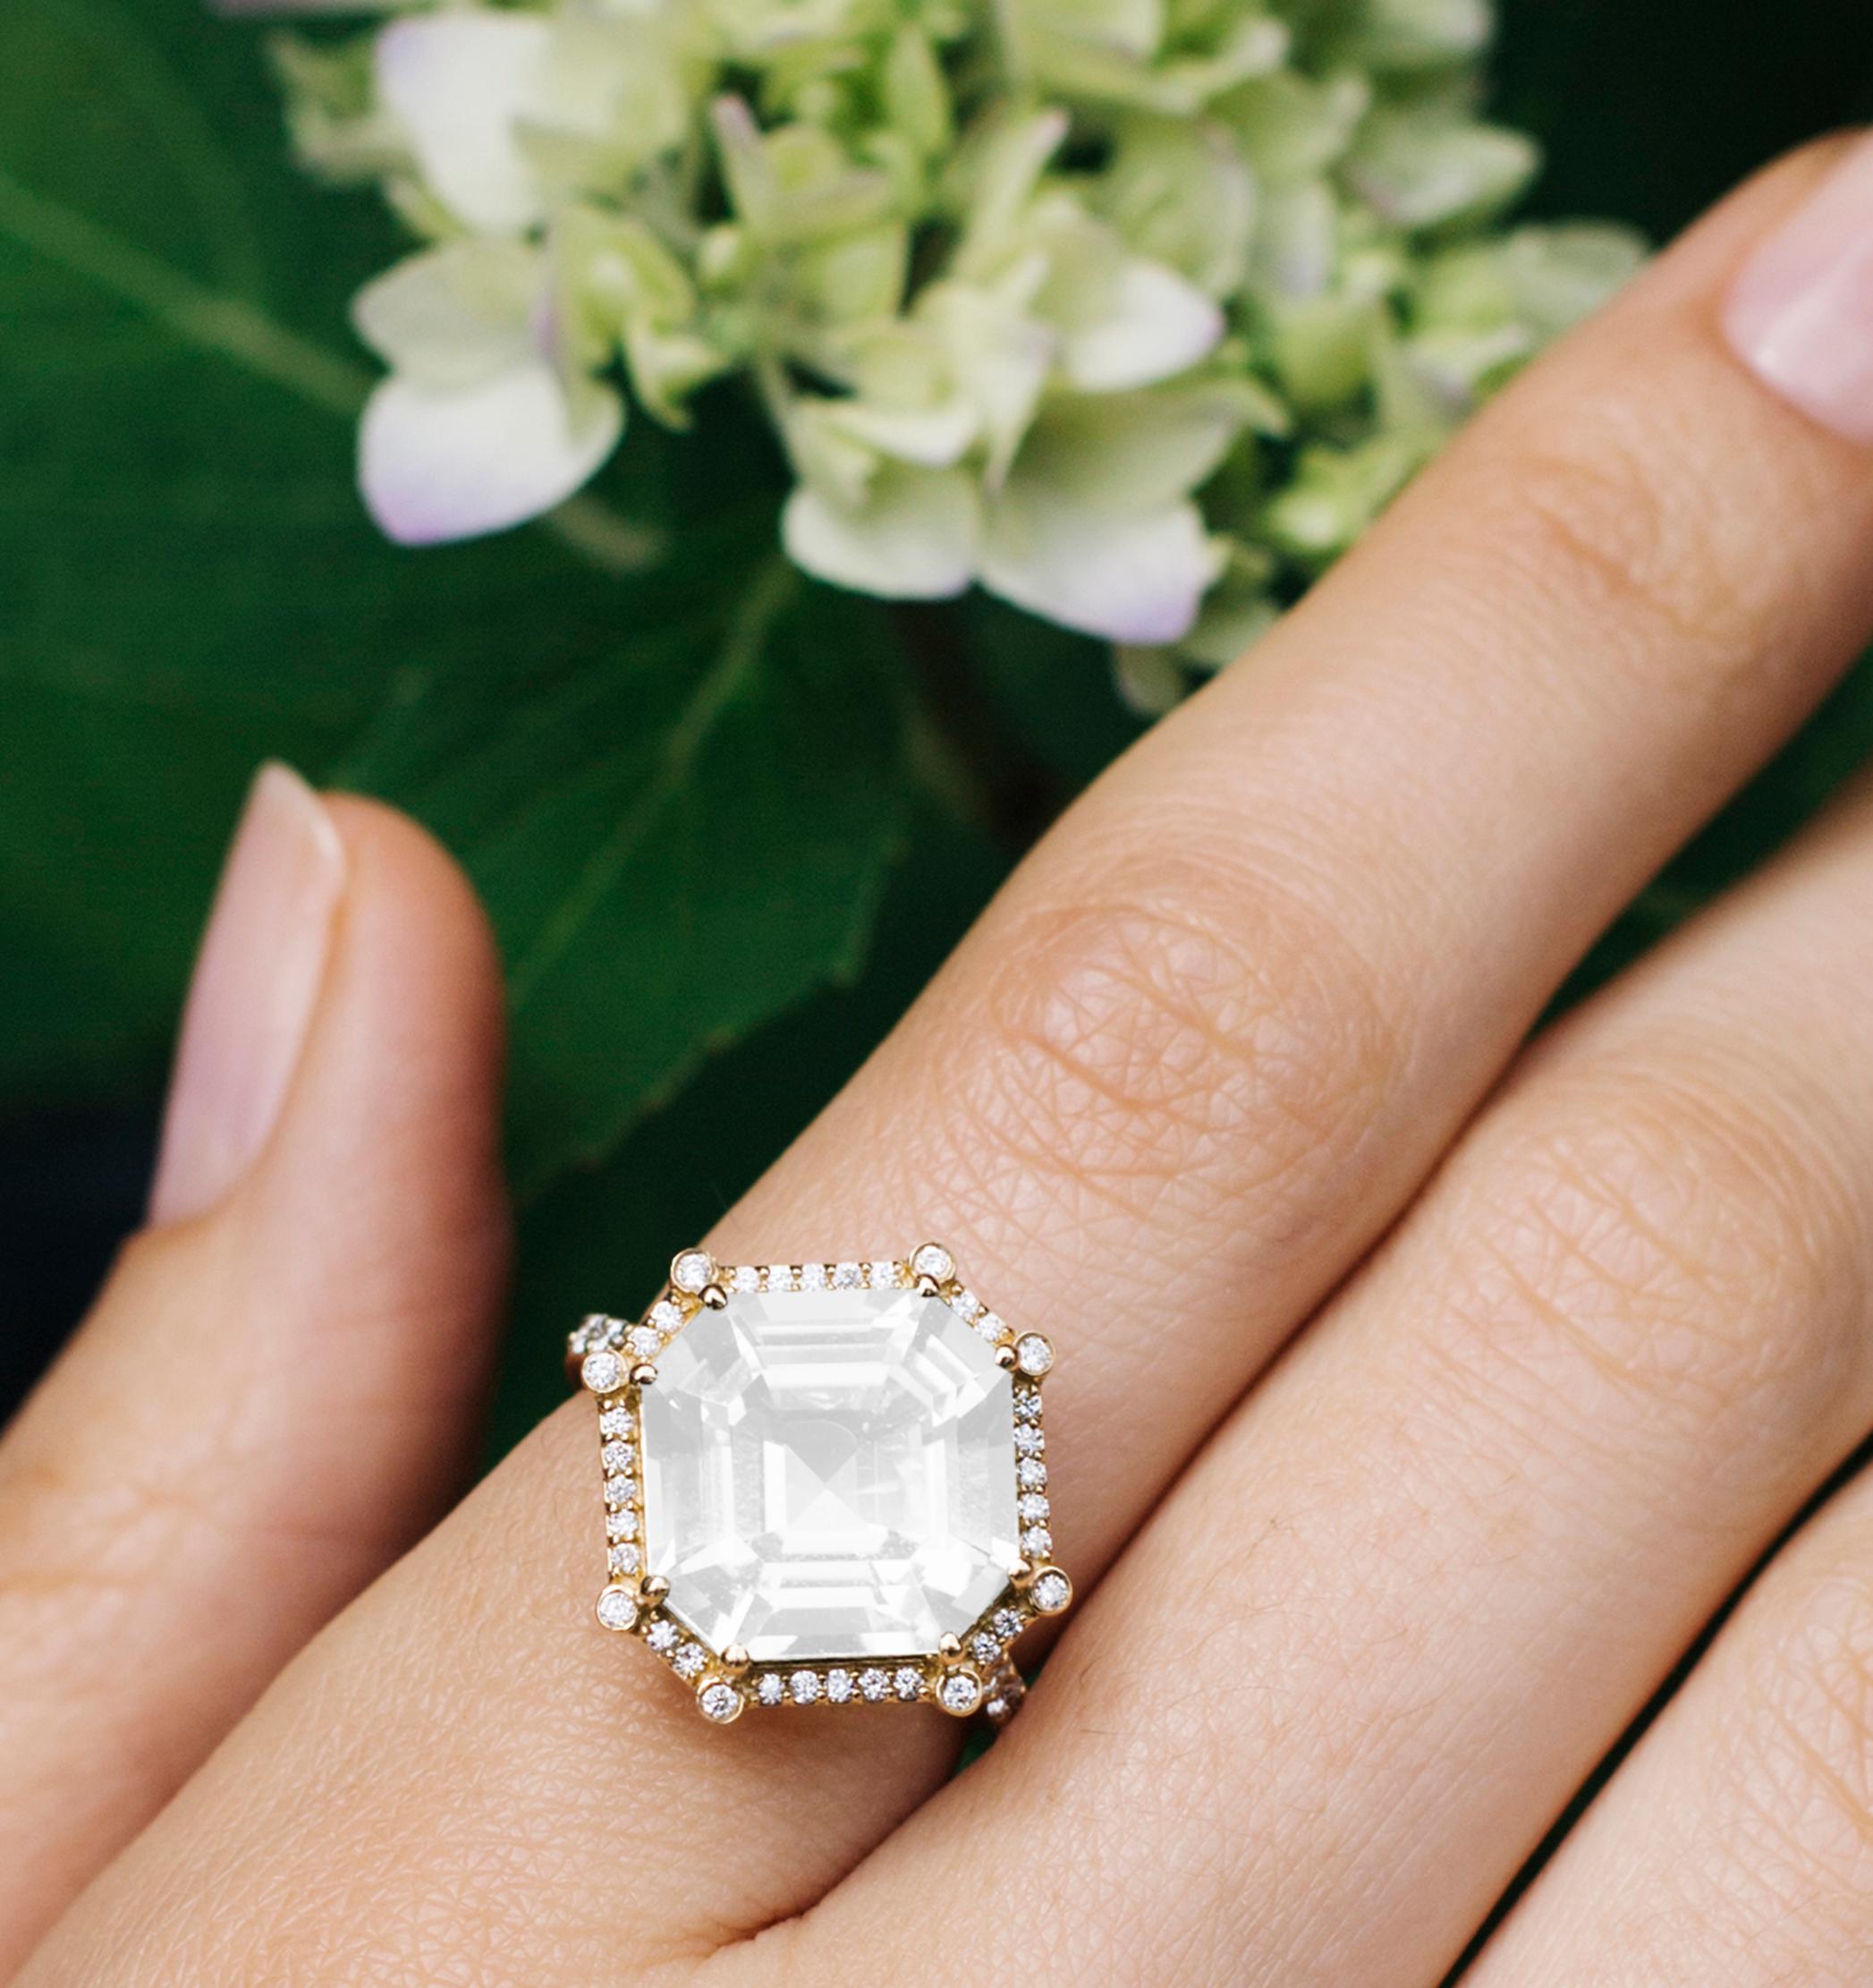 This Moon Quartz Emerald Cut Asscher Ring, is a mesmerizing masterpiece from the 'Gossip' Collection. Crafted in luxurious 18K Yellow Gold, this exquisite ring features a captivating emerald-cut Moon Quartz center stone that radiates an ethereal